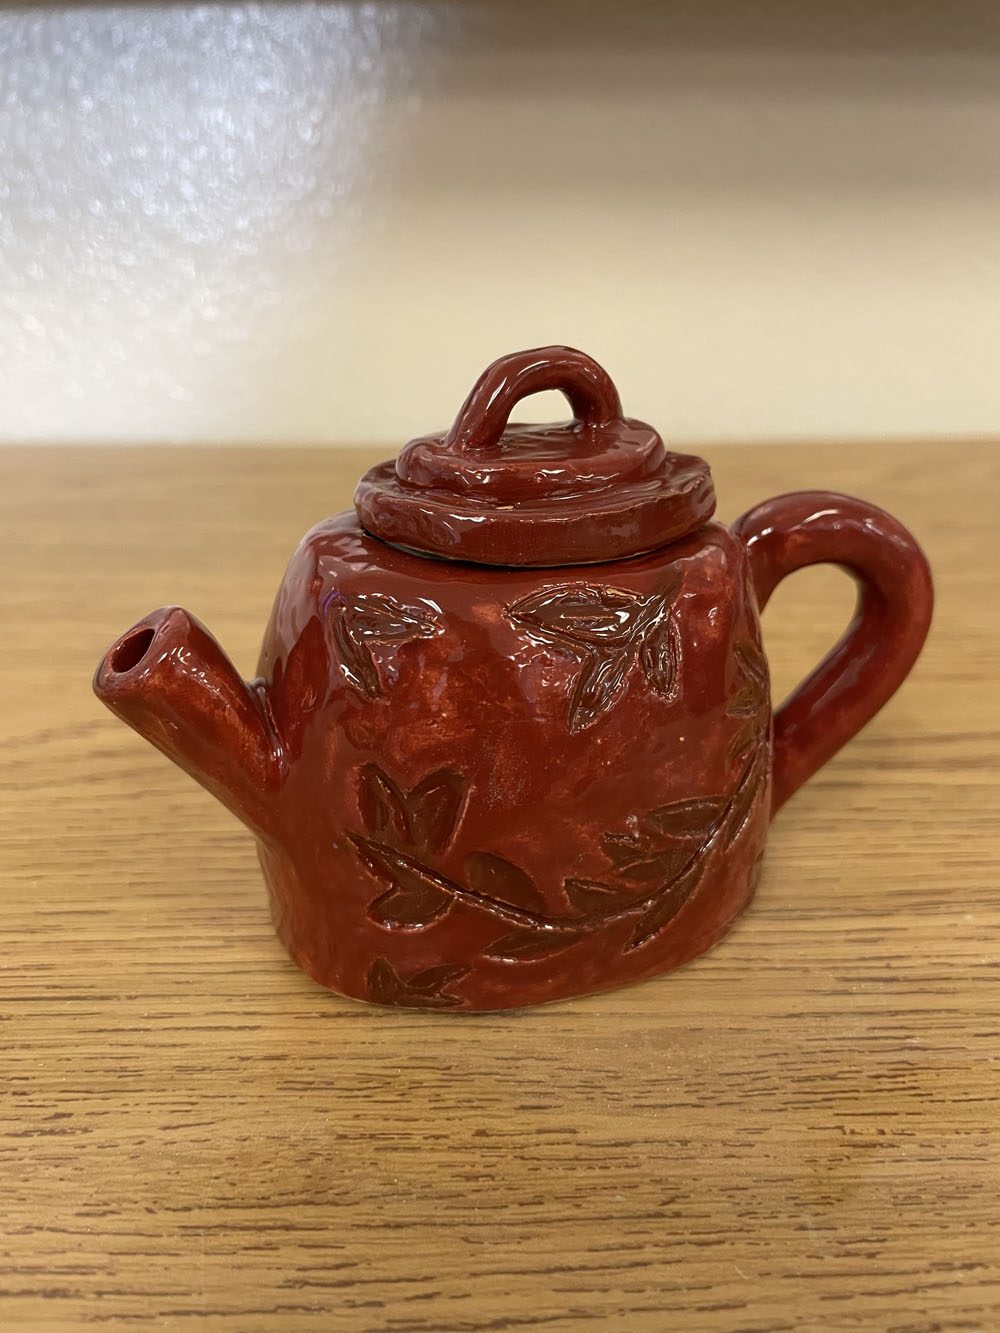 Clay tea pot with leaves